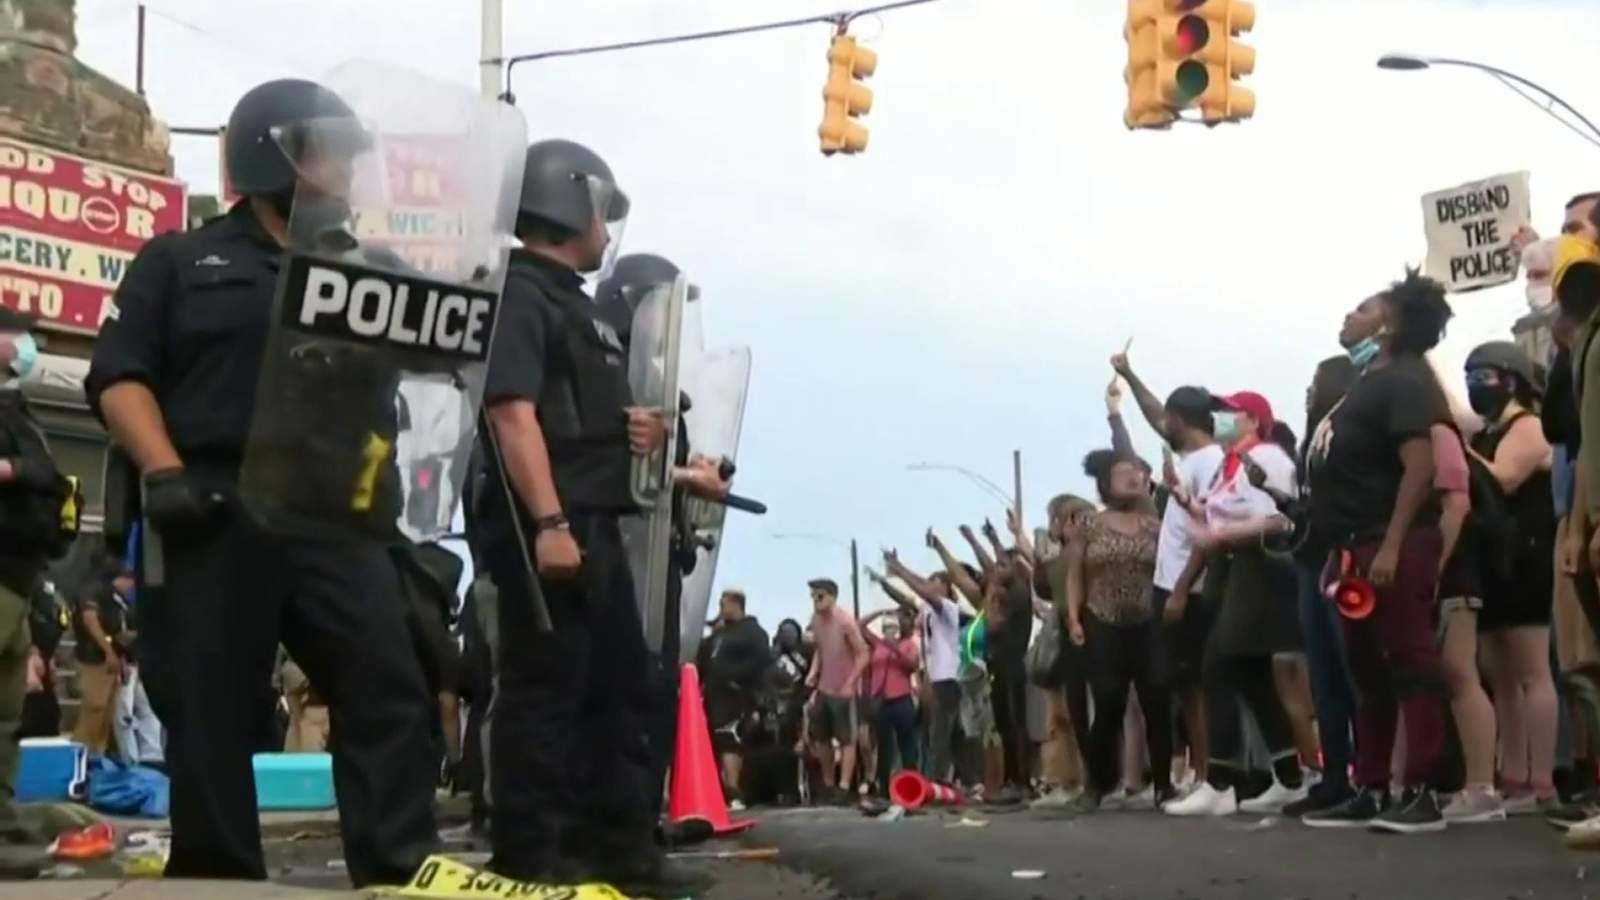 Protesters march on Detroit Police 12th Precinct following deadly shooting